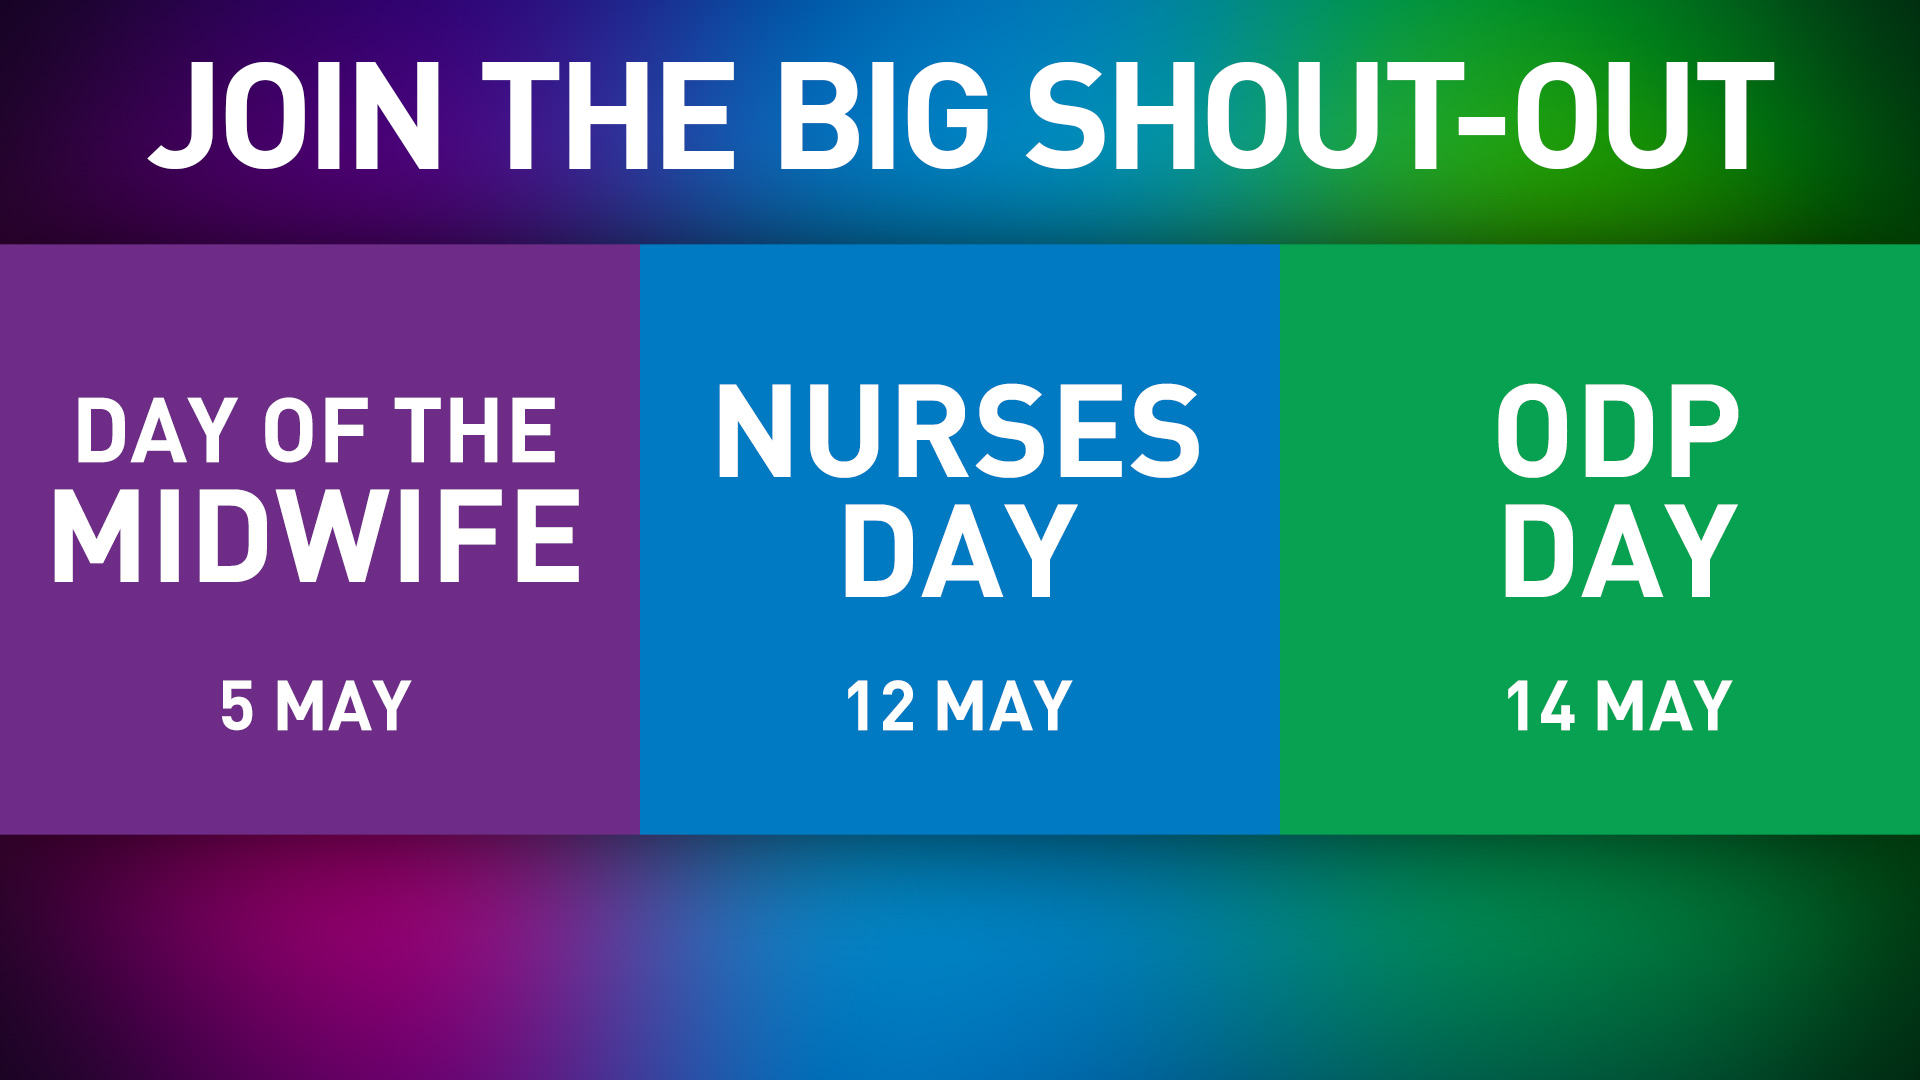 Big shout-out for our midwives, nurses and ODPs